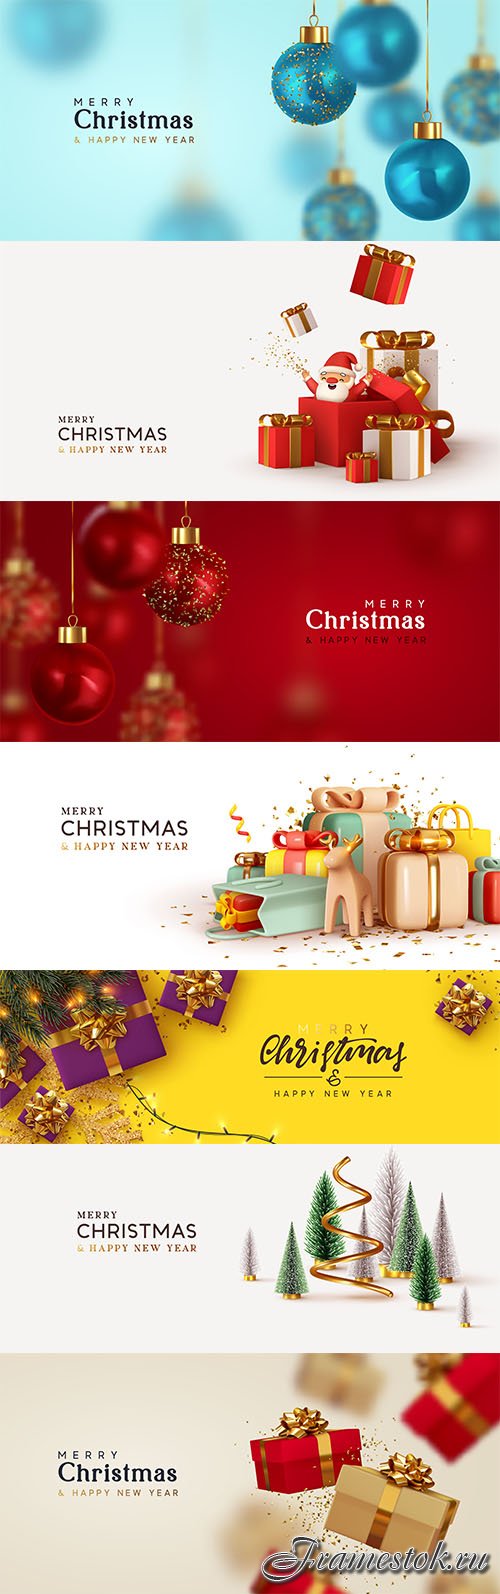 Happy new year and merry christmas background